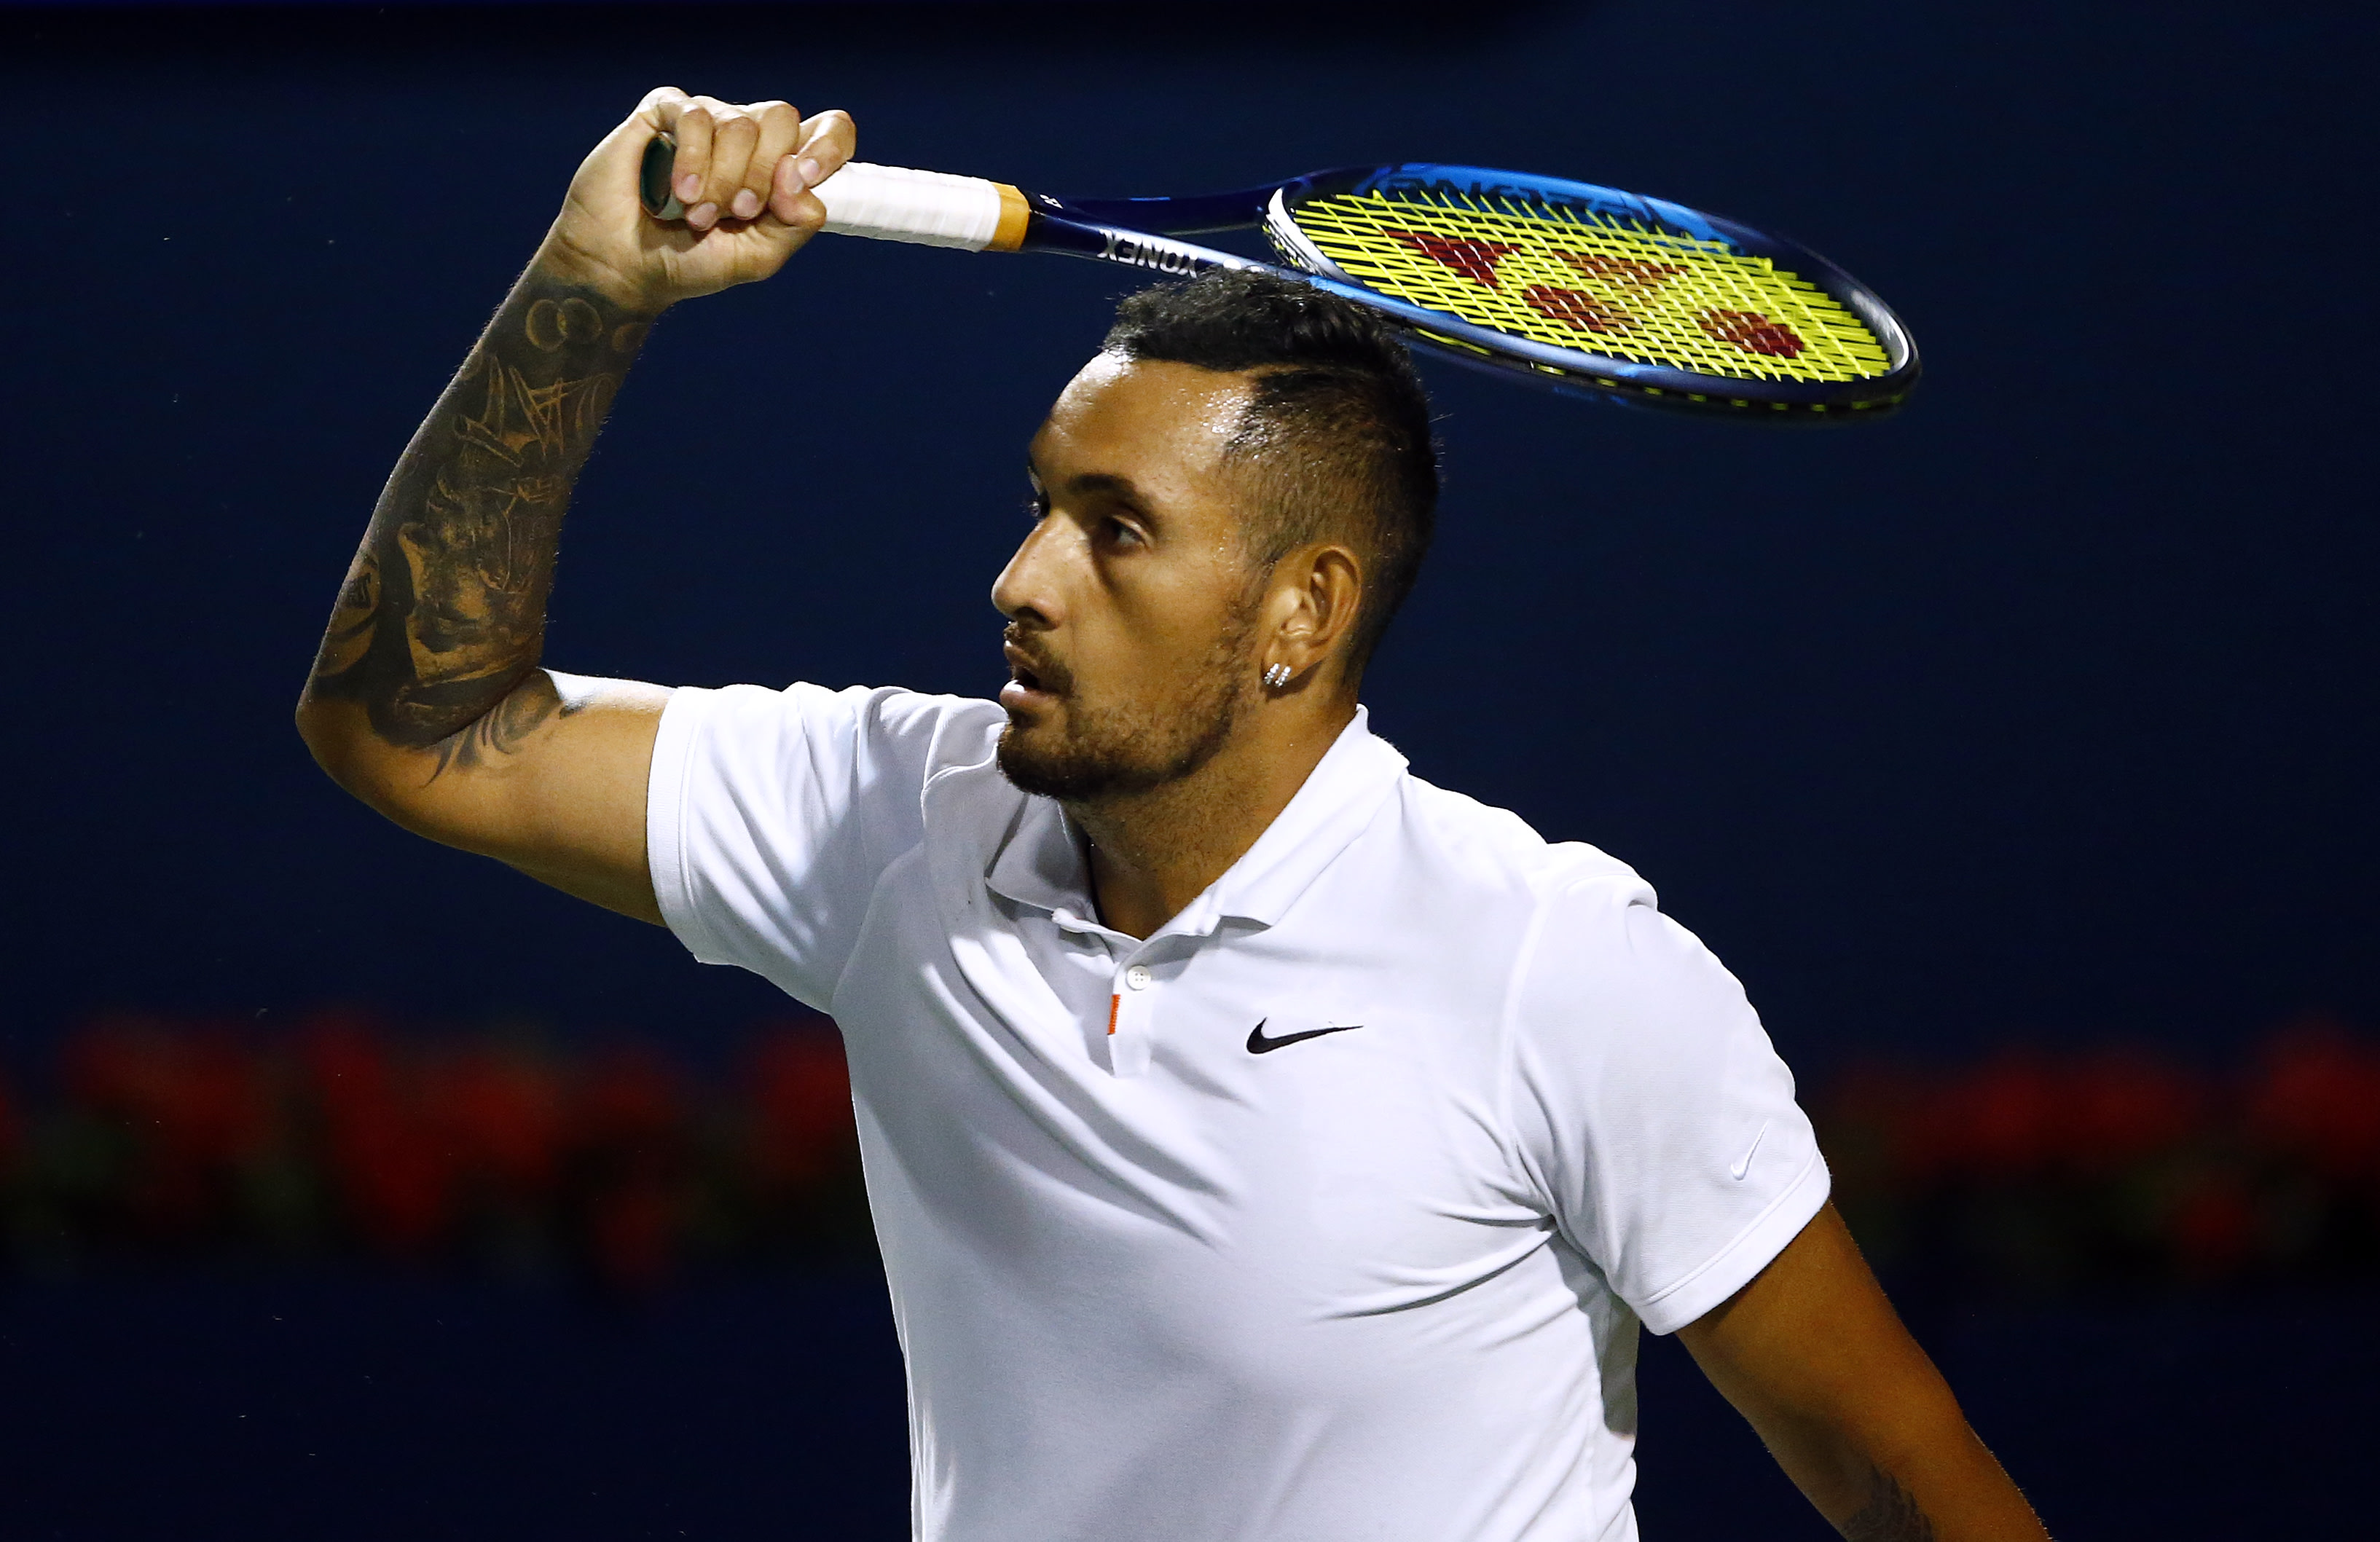 Reilly Opelka hands Nick Kyrgios third straight loss in Toronto night session